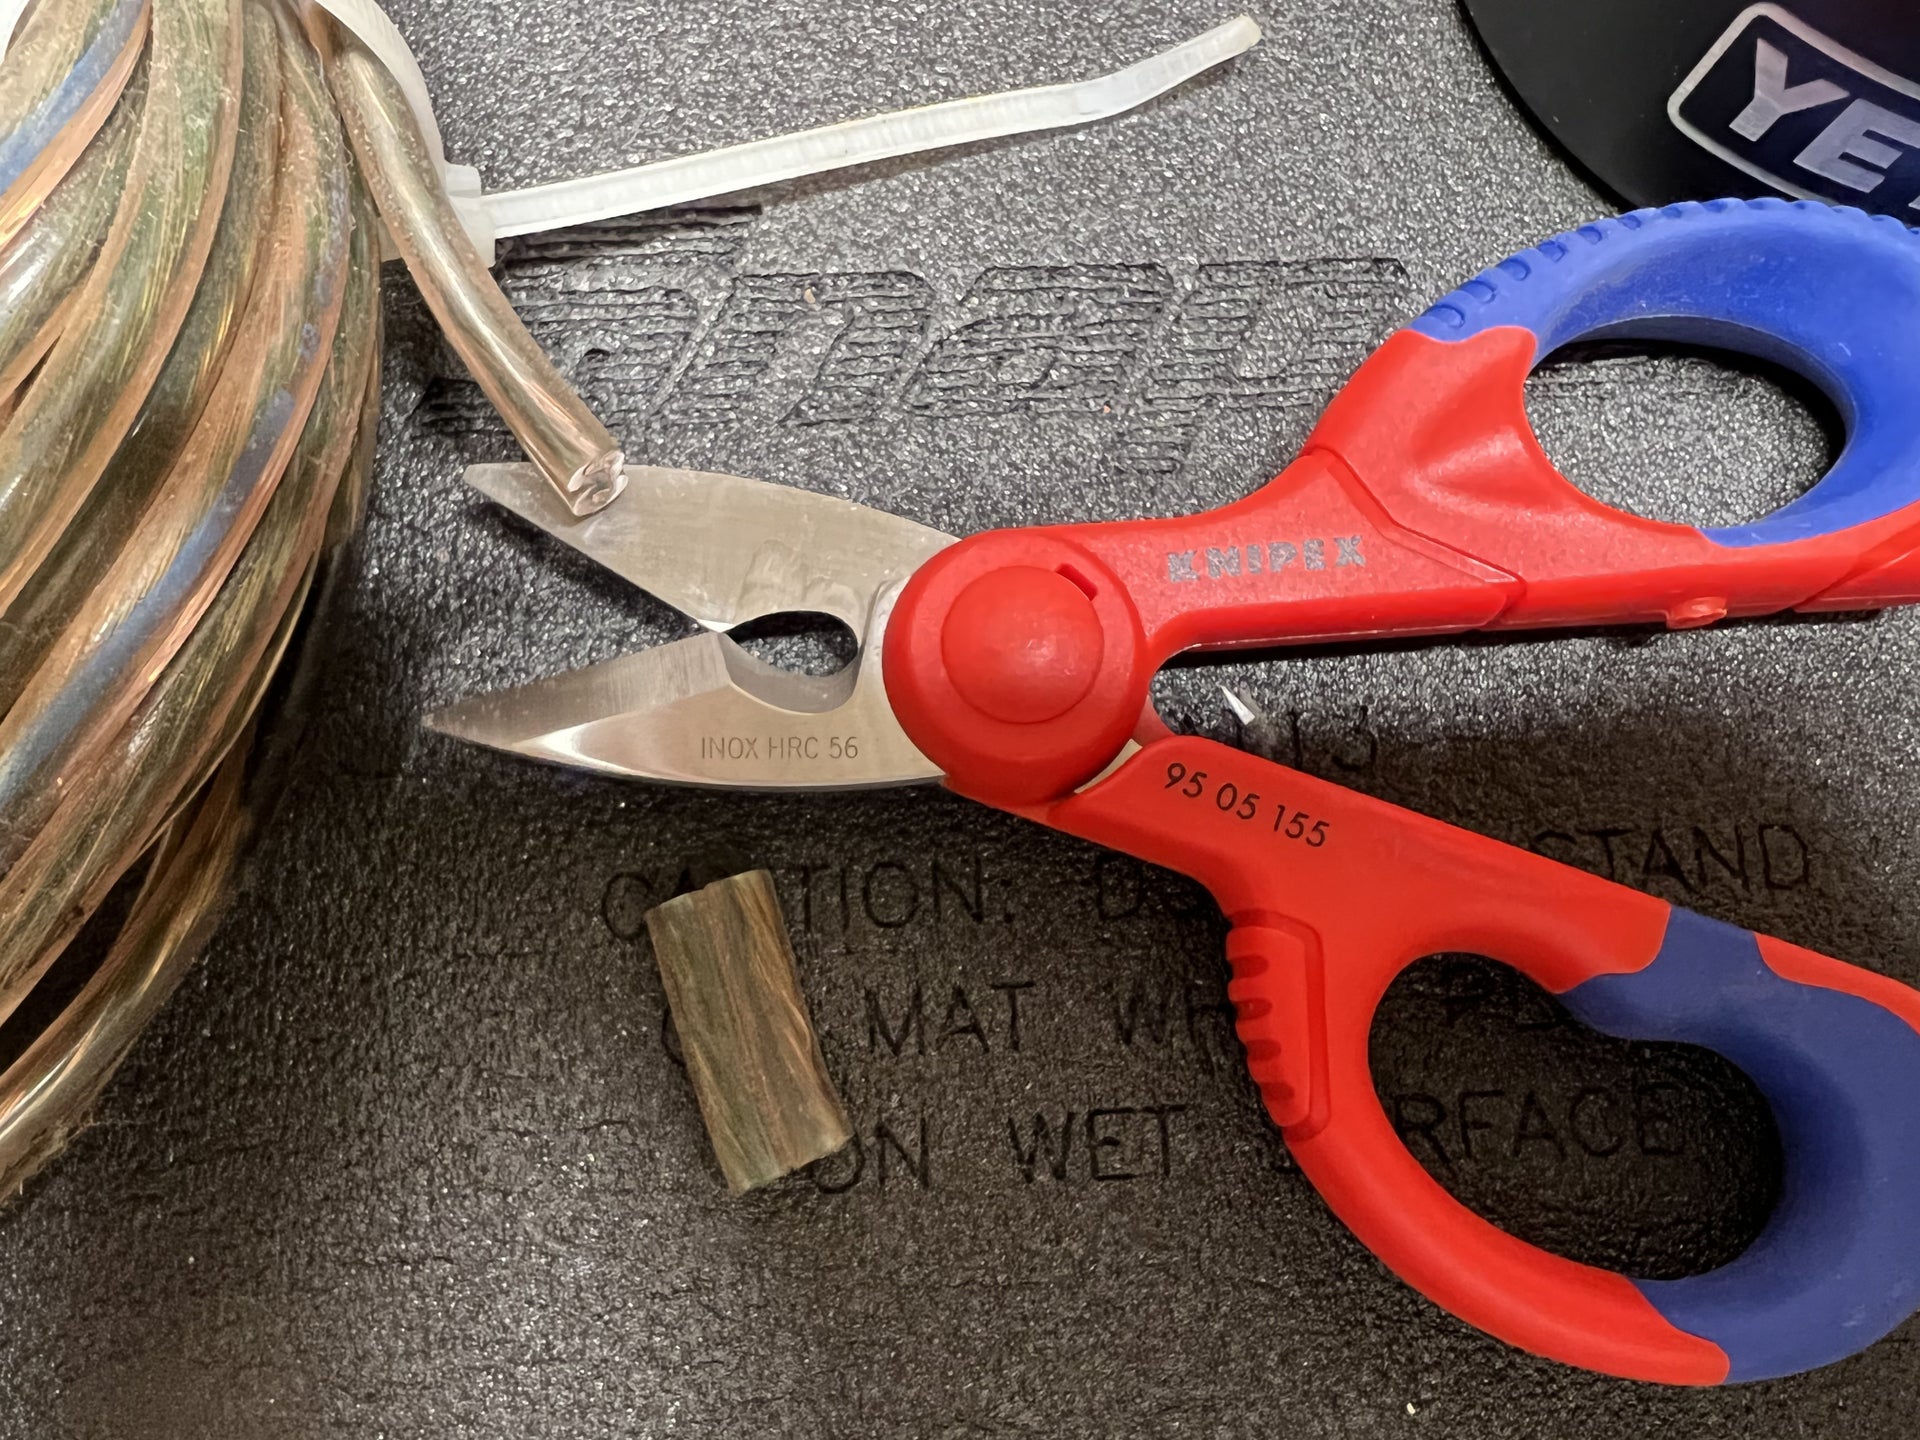 Dang, now, I'm going to have to get more Knipex pliers